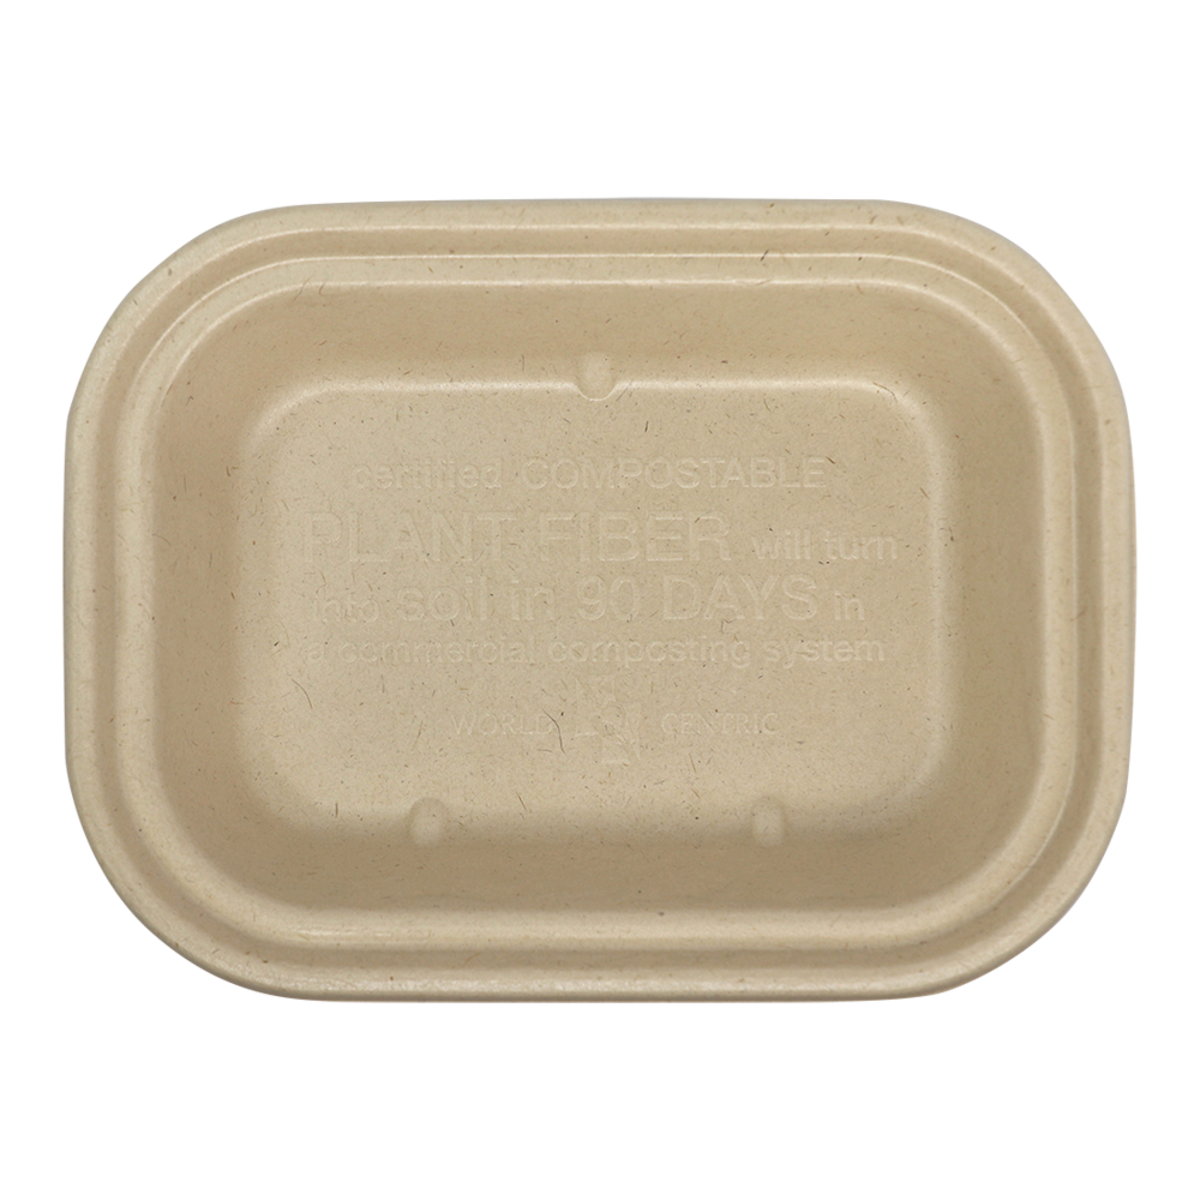 17 oz Fiber To Go Box Container | 8" x 6" x 1.5" | Compostable | (Pack of 100)